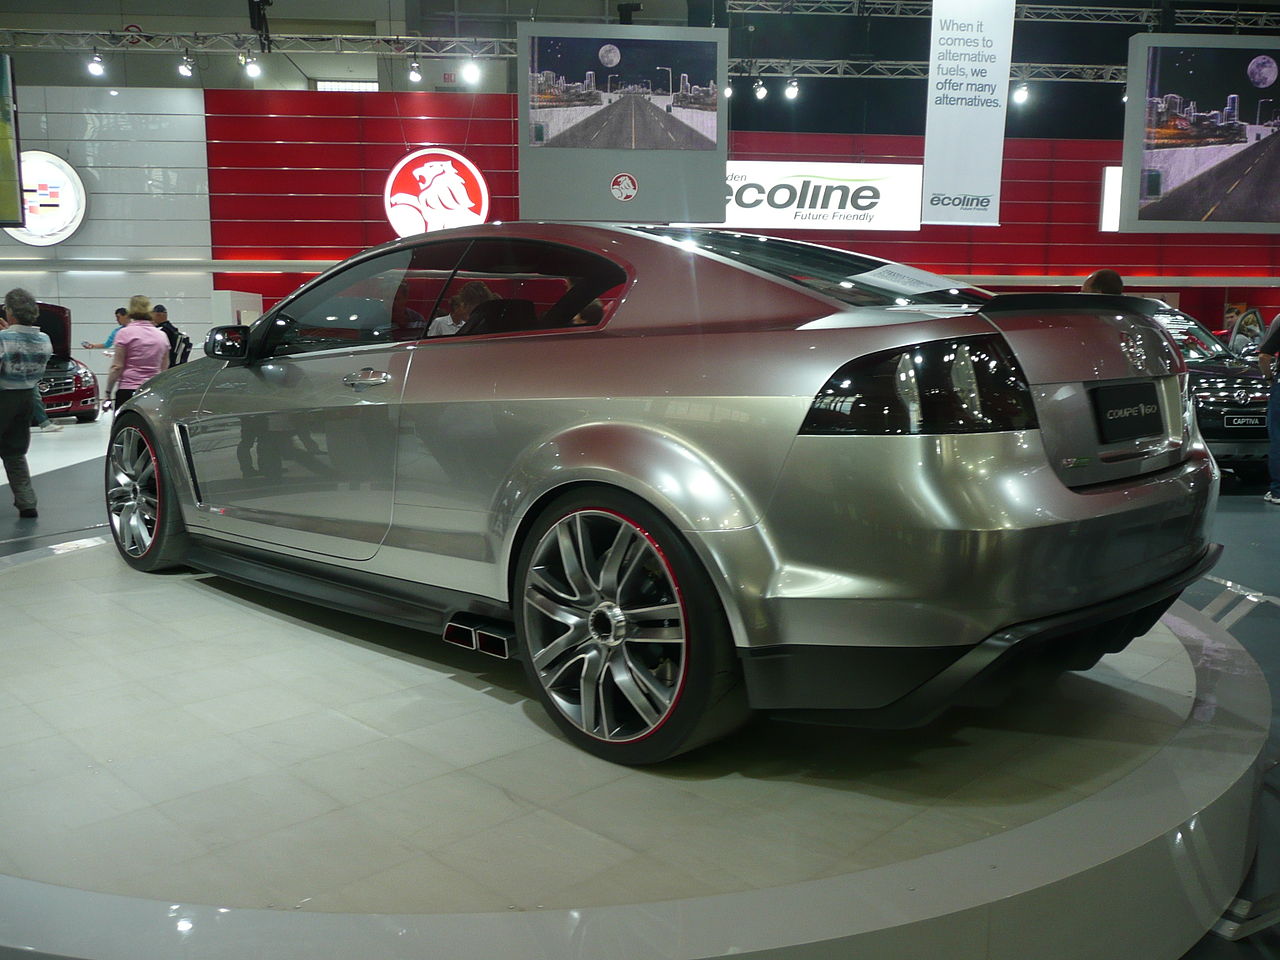 Image of 2008 Holden Coupe 60 (concept) 04